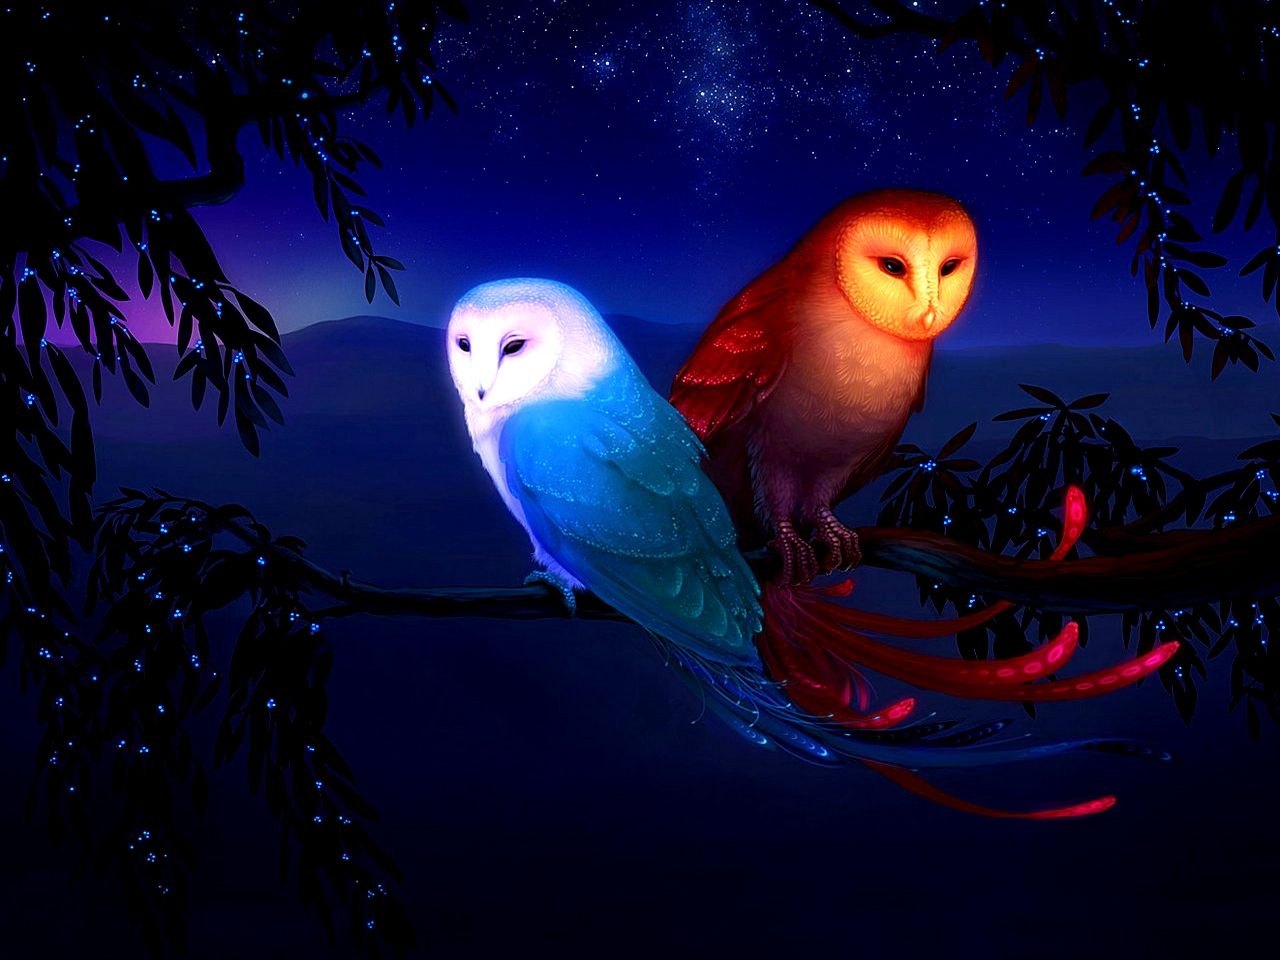 Owl Wallpaper, Background, Image, Picture. Design Trends PSD, Vector Downloads